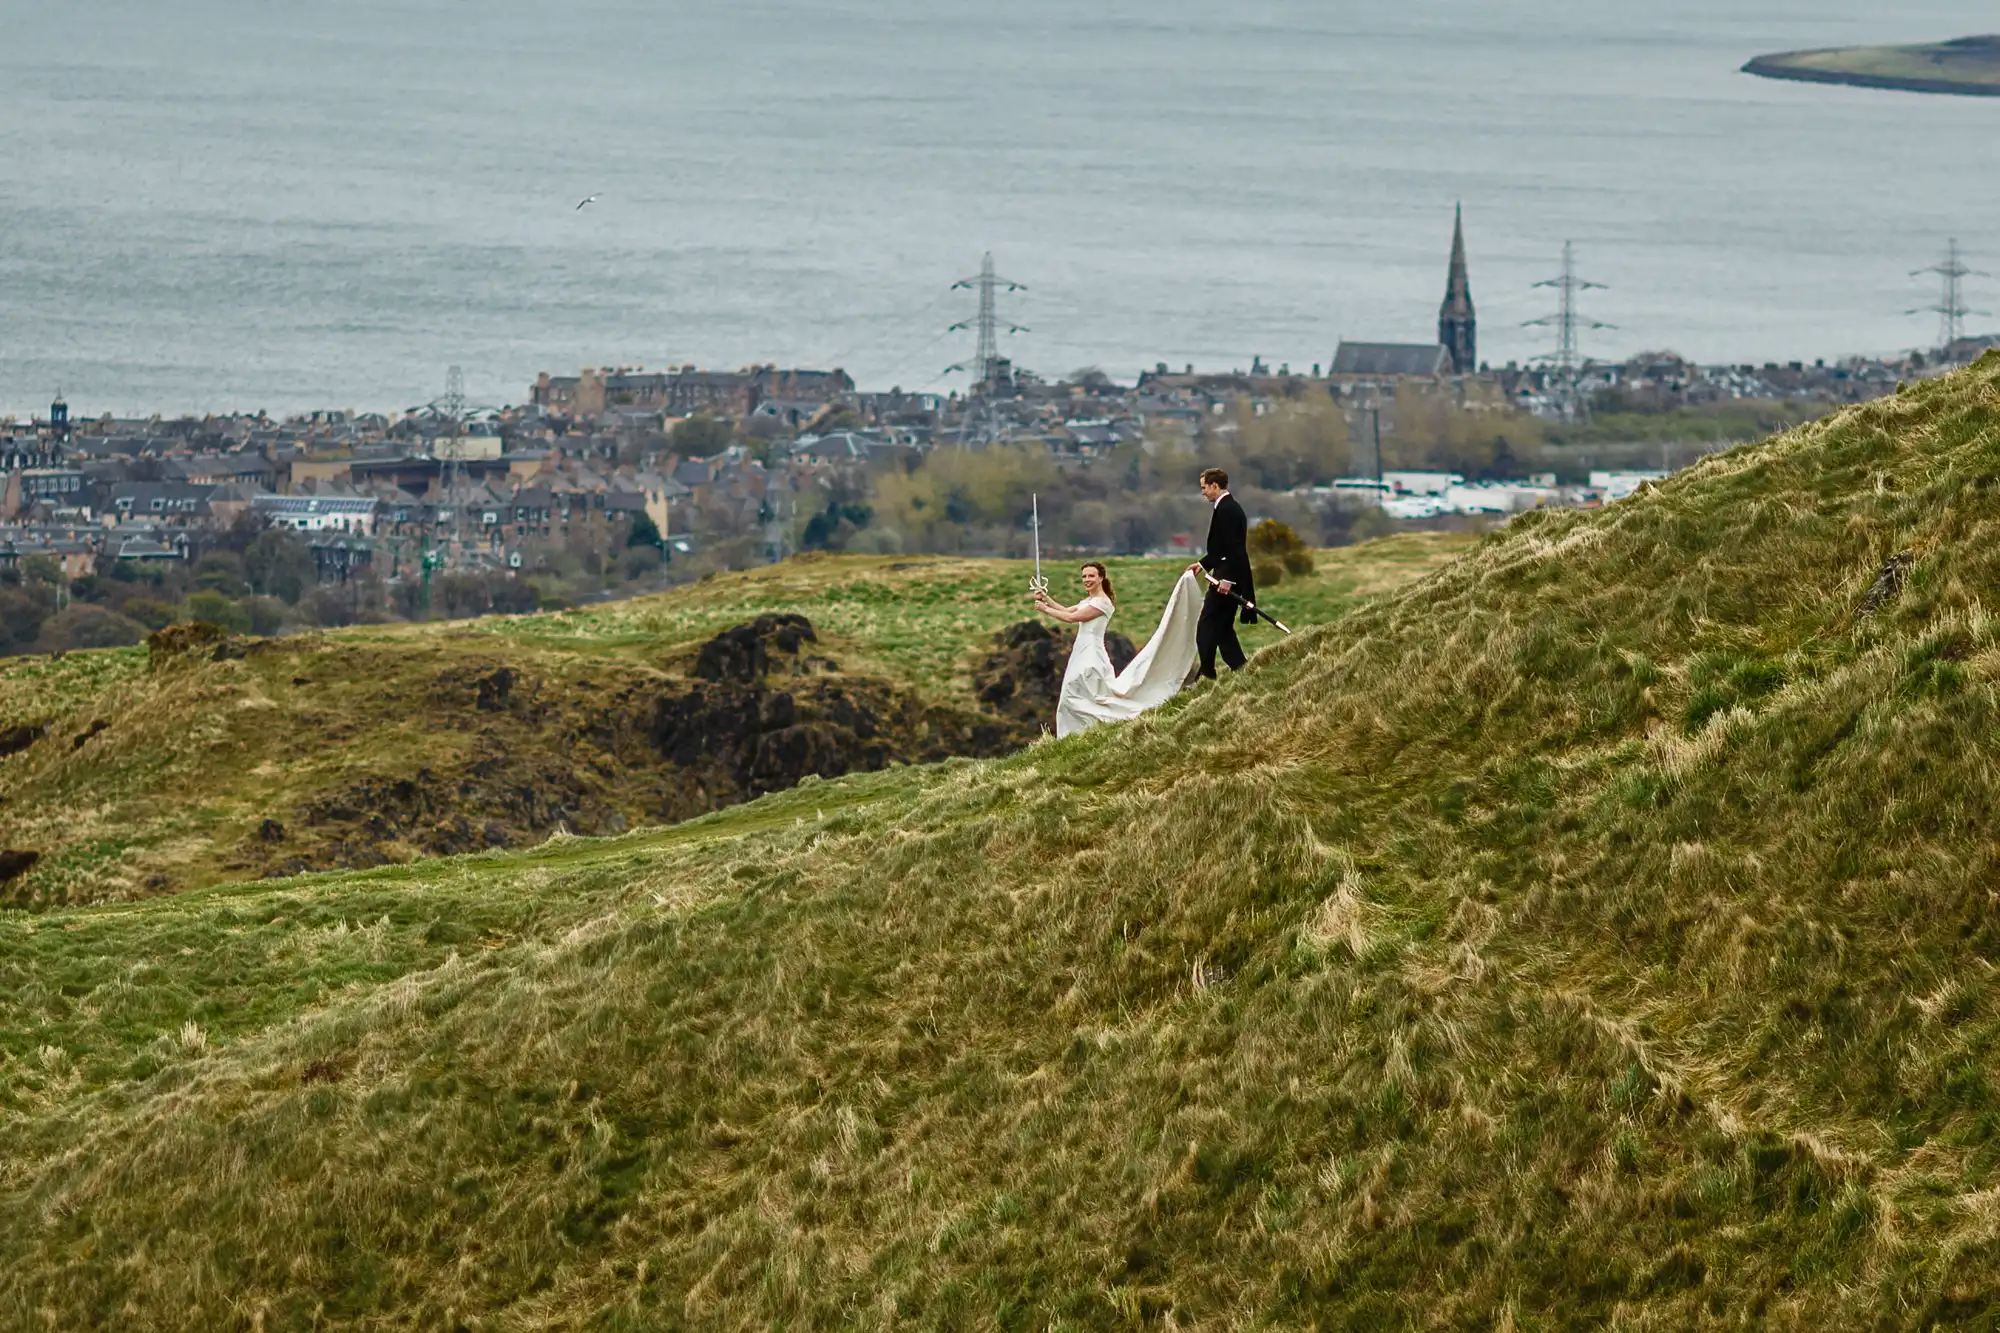 A couple in wedding attire walk hand in hand on a grassy hill, with a coastal town and water in the background.